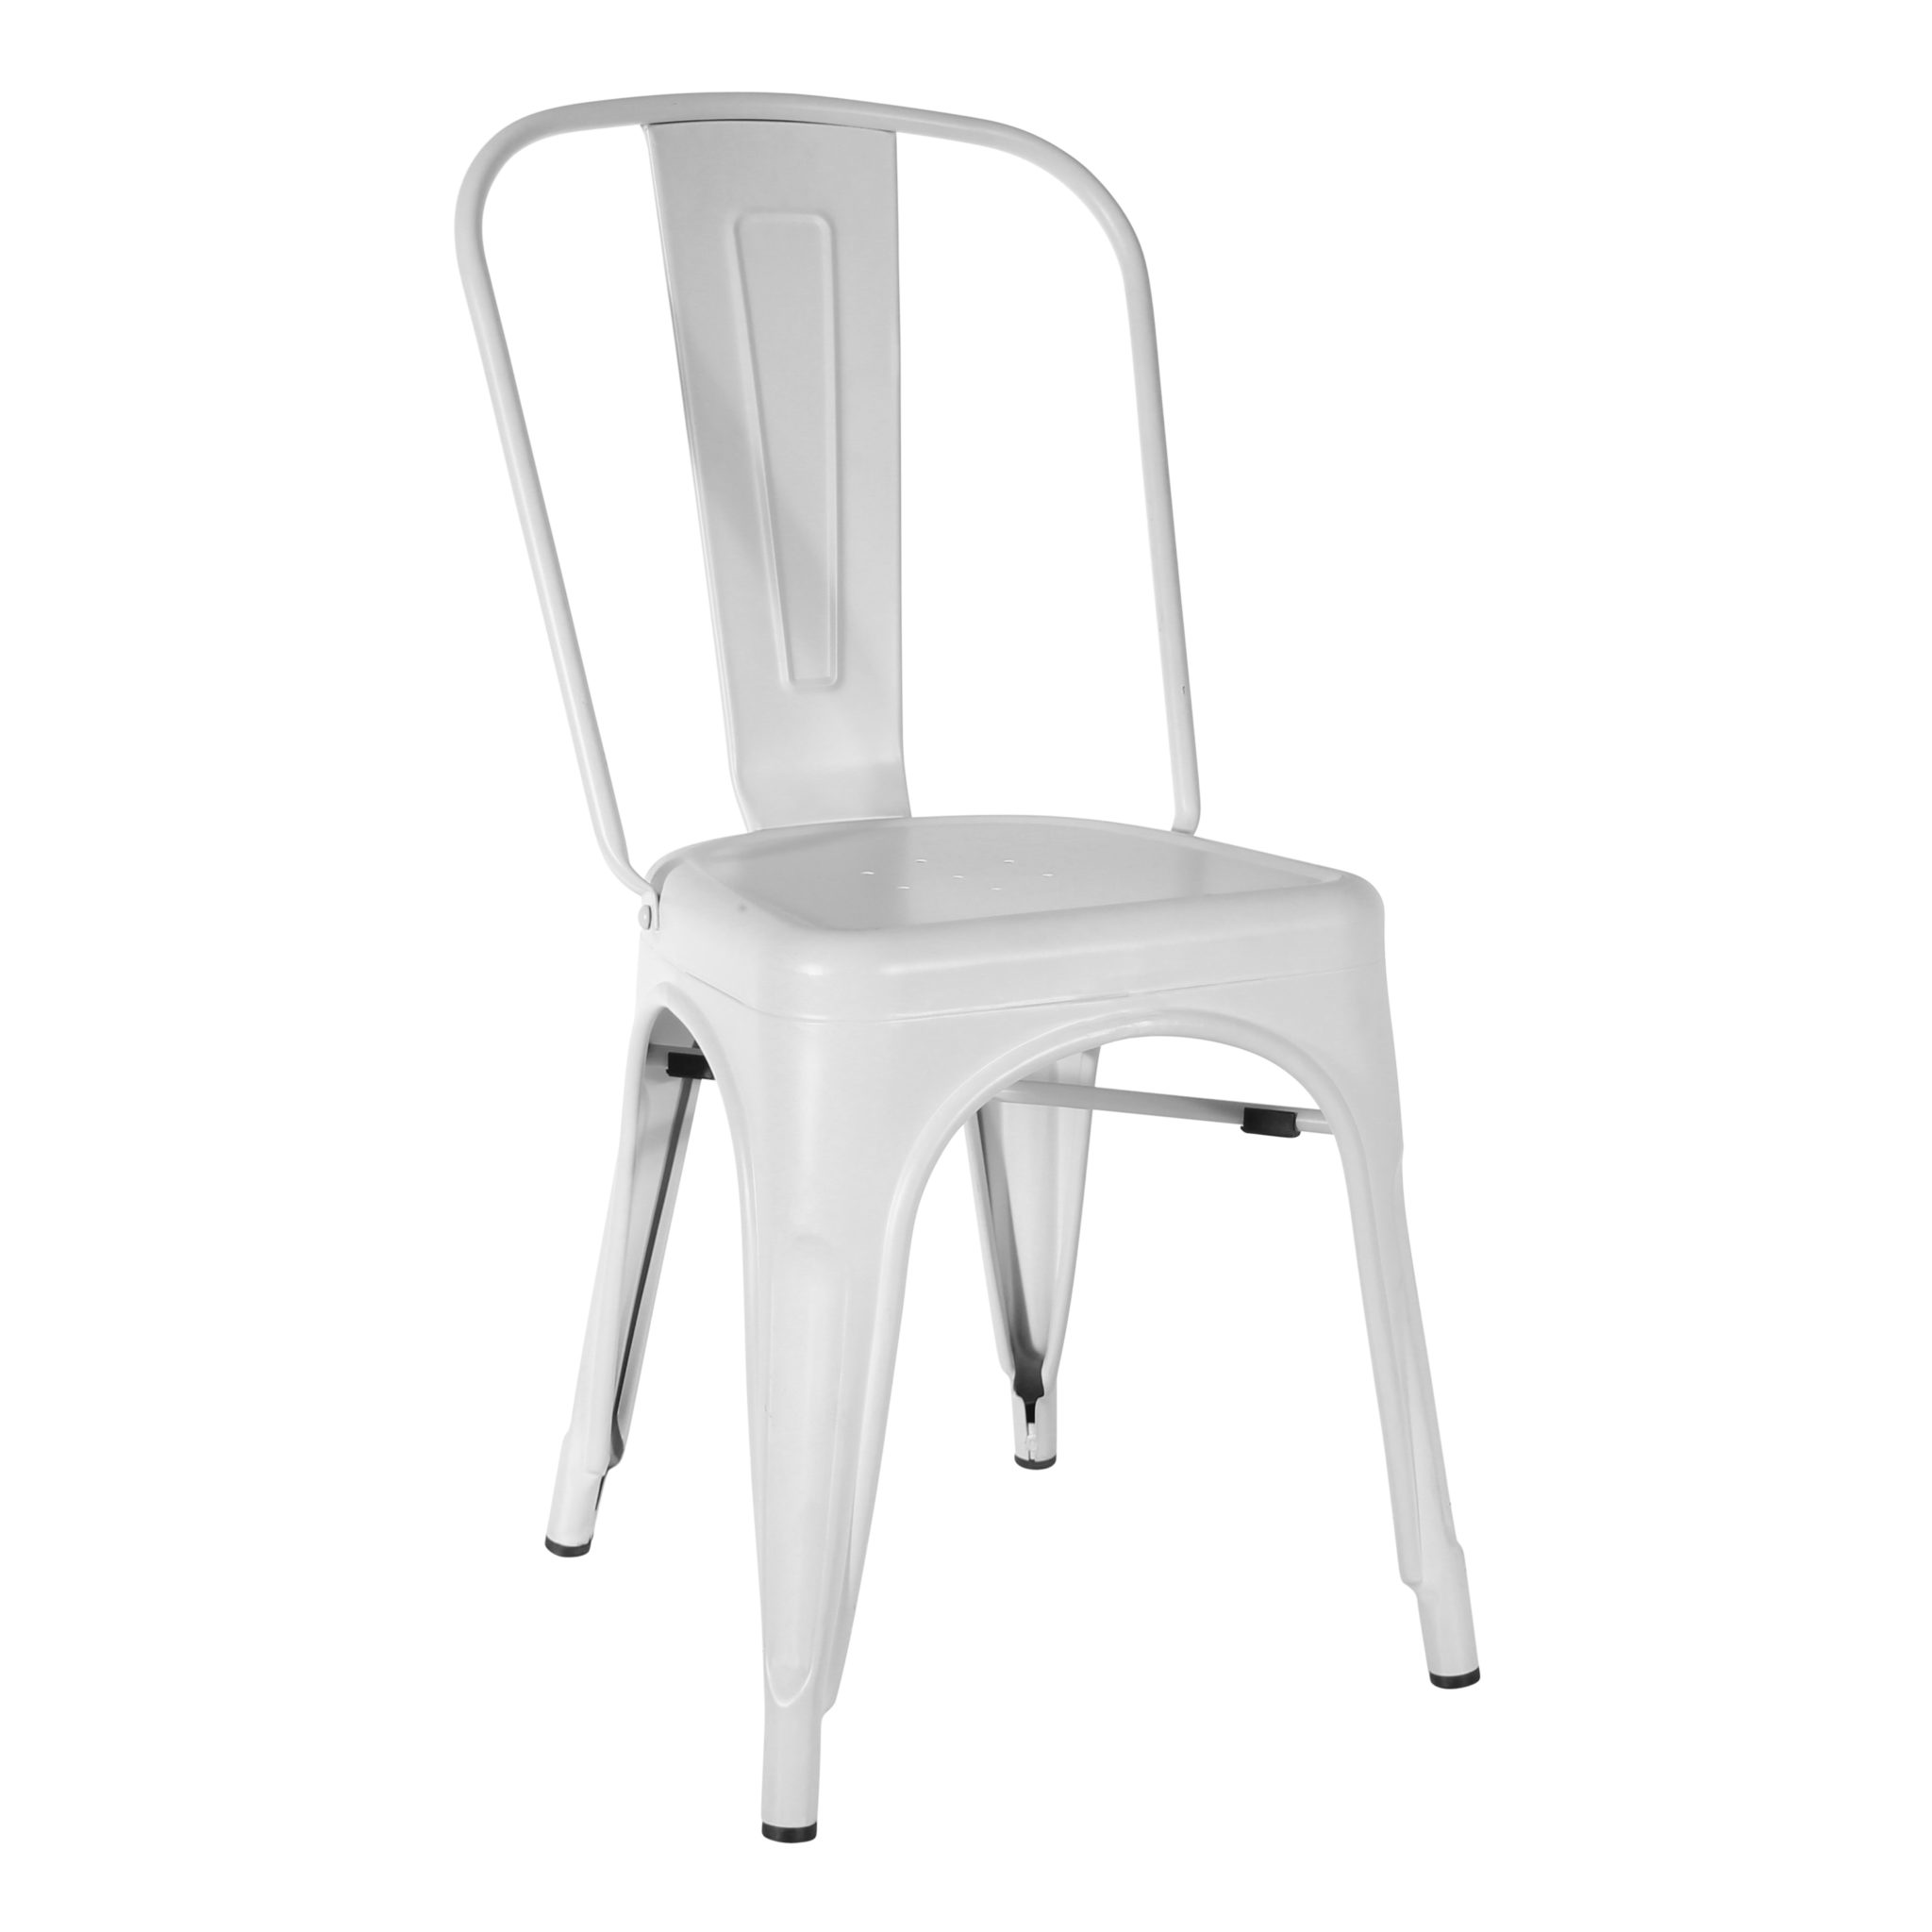 Replica Tolix Chair In Matte White Cafe Chairs Melbourne